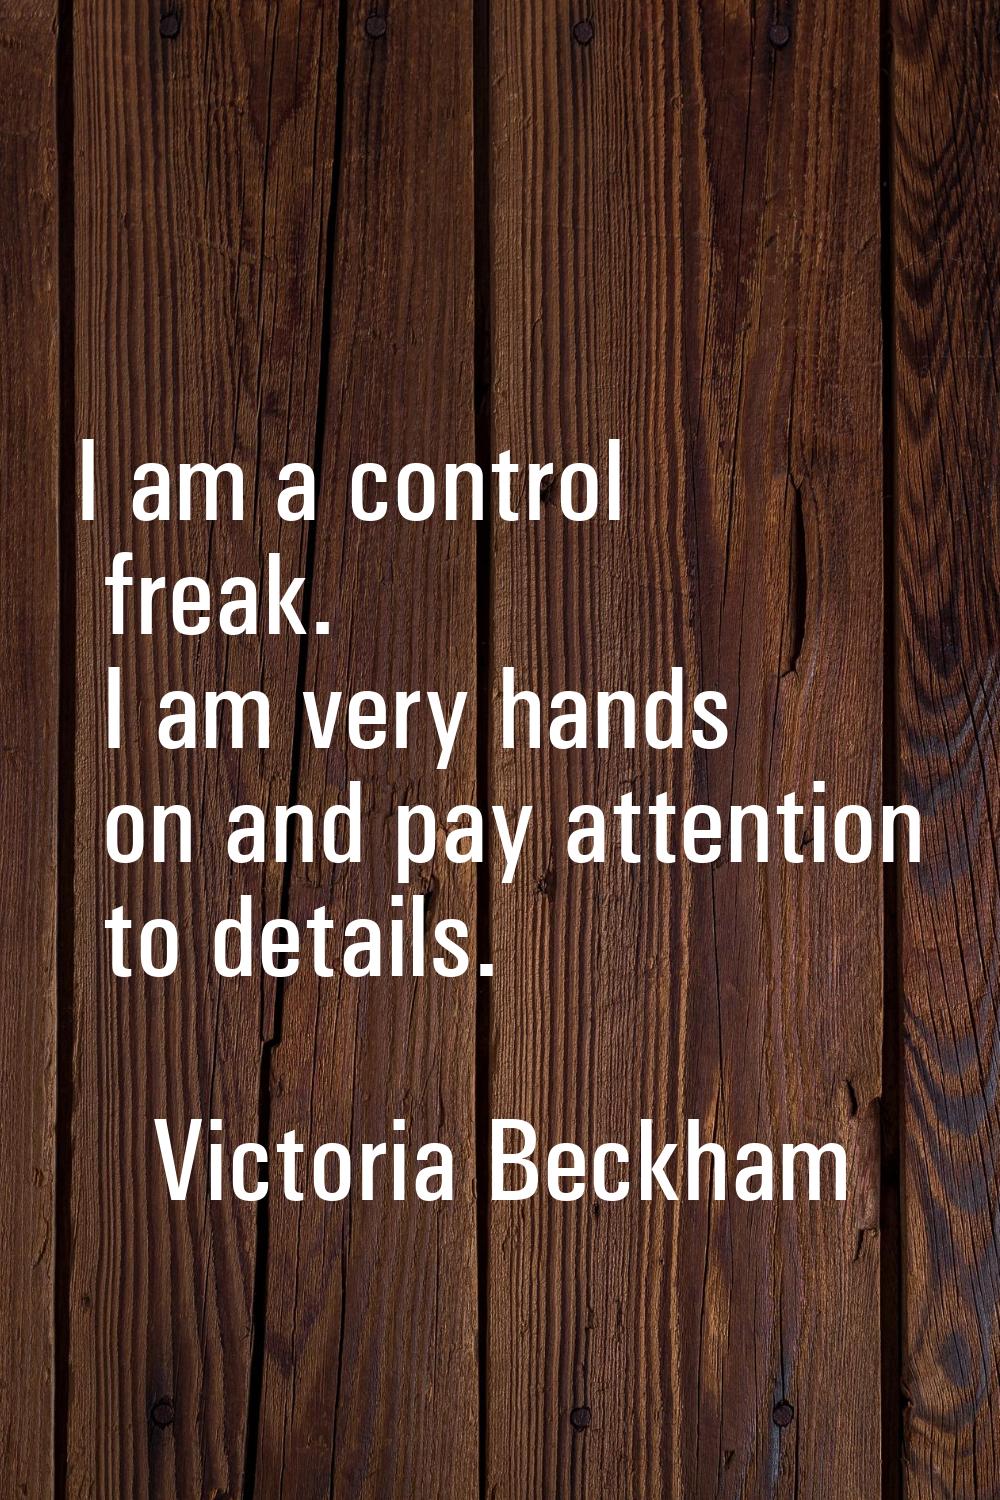 I am a control freak. I am very hands on and pay attention to details.